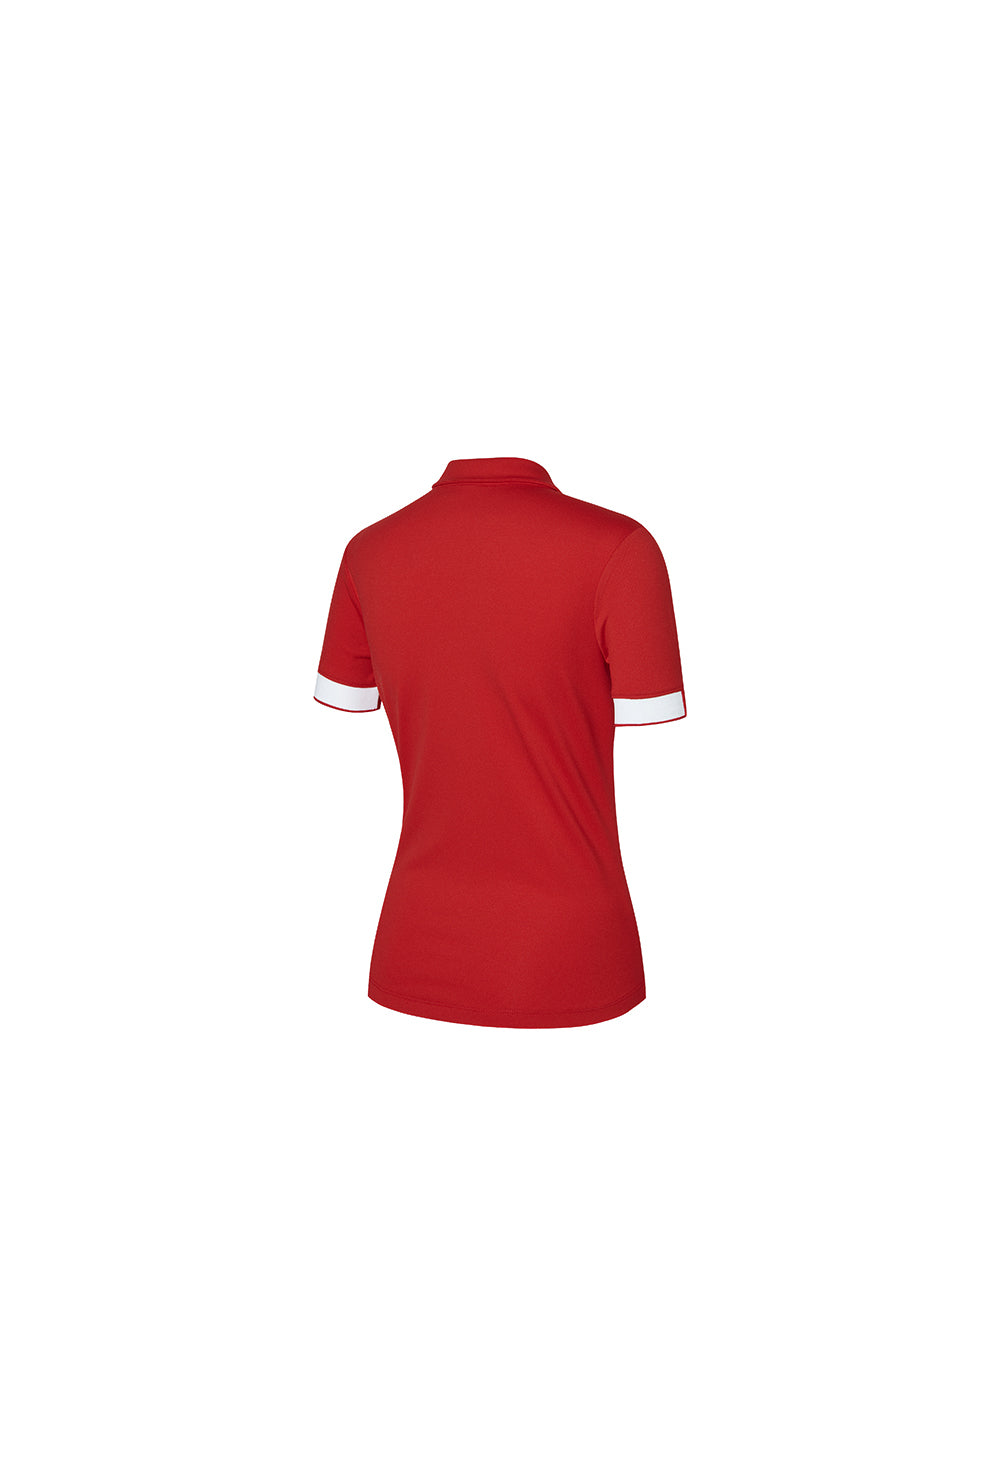 Pique Polo Slim fit Short Sleeve - Popi Red